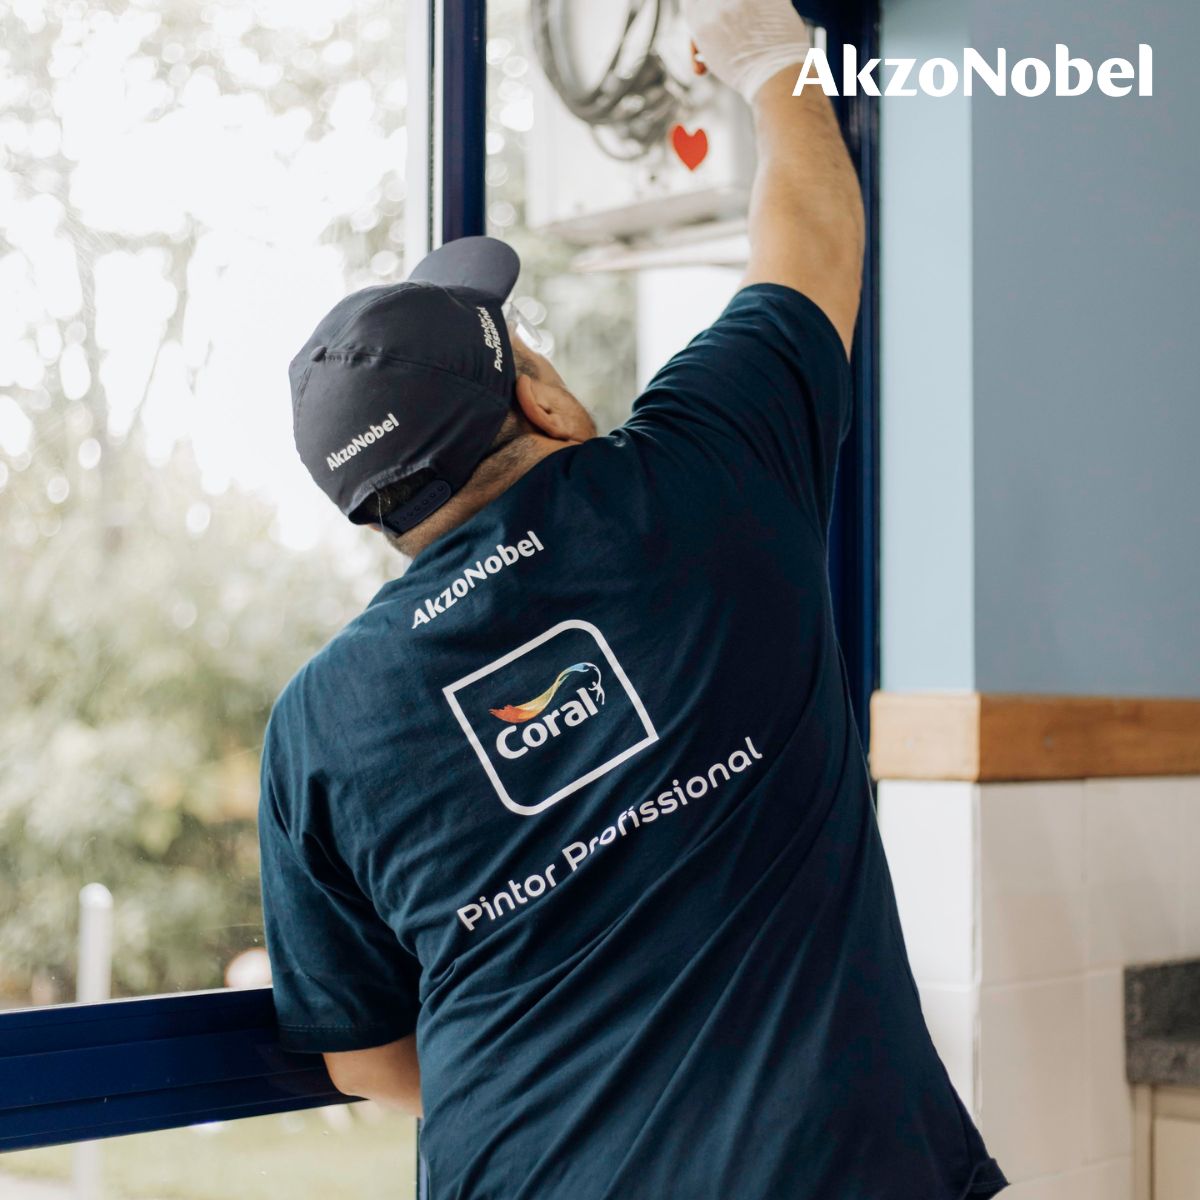 Schoolchildren in the Florianópolis district of Brazil have yet another ally in the fight against dengue fever,thanks to @AkzoNobel's Well-being Protection Anti-Mosquito varnish. Painted on the walls of selected schools, our Coralcoating will repel mosquitoes for up to two years.